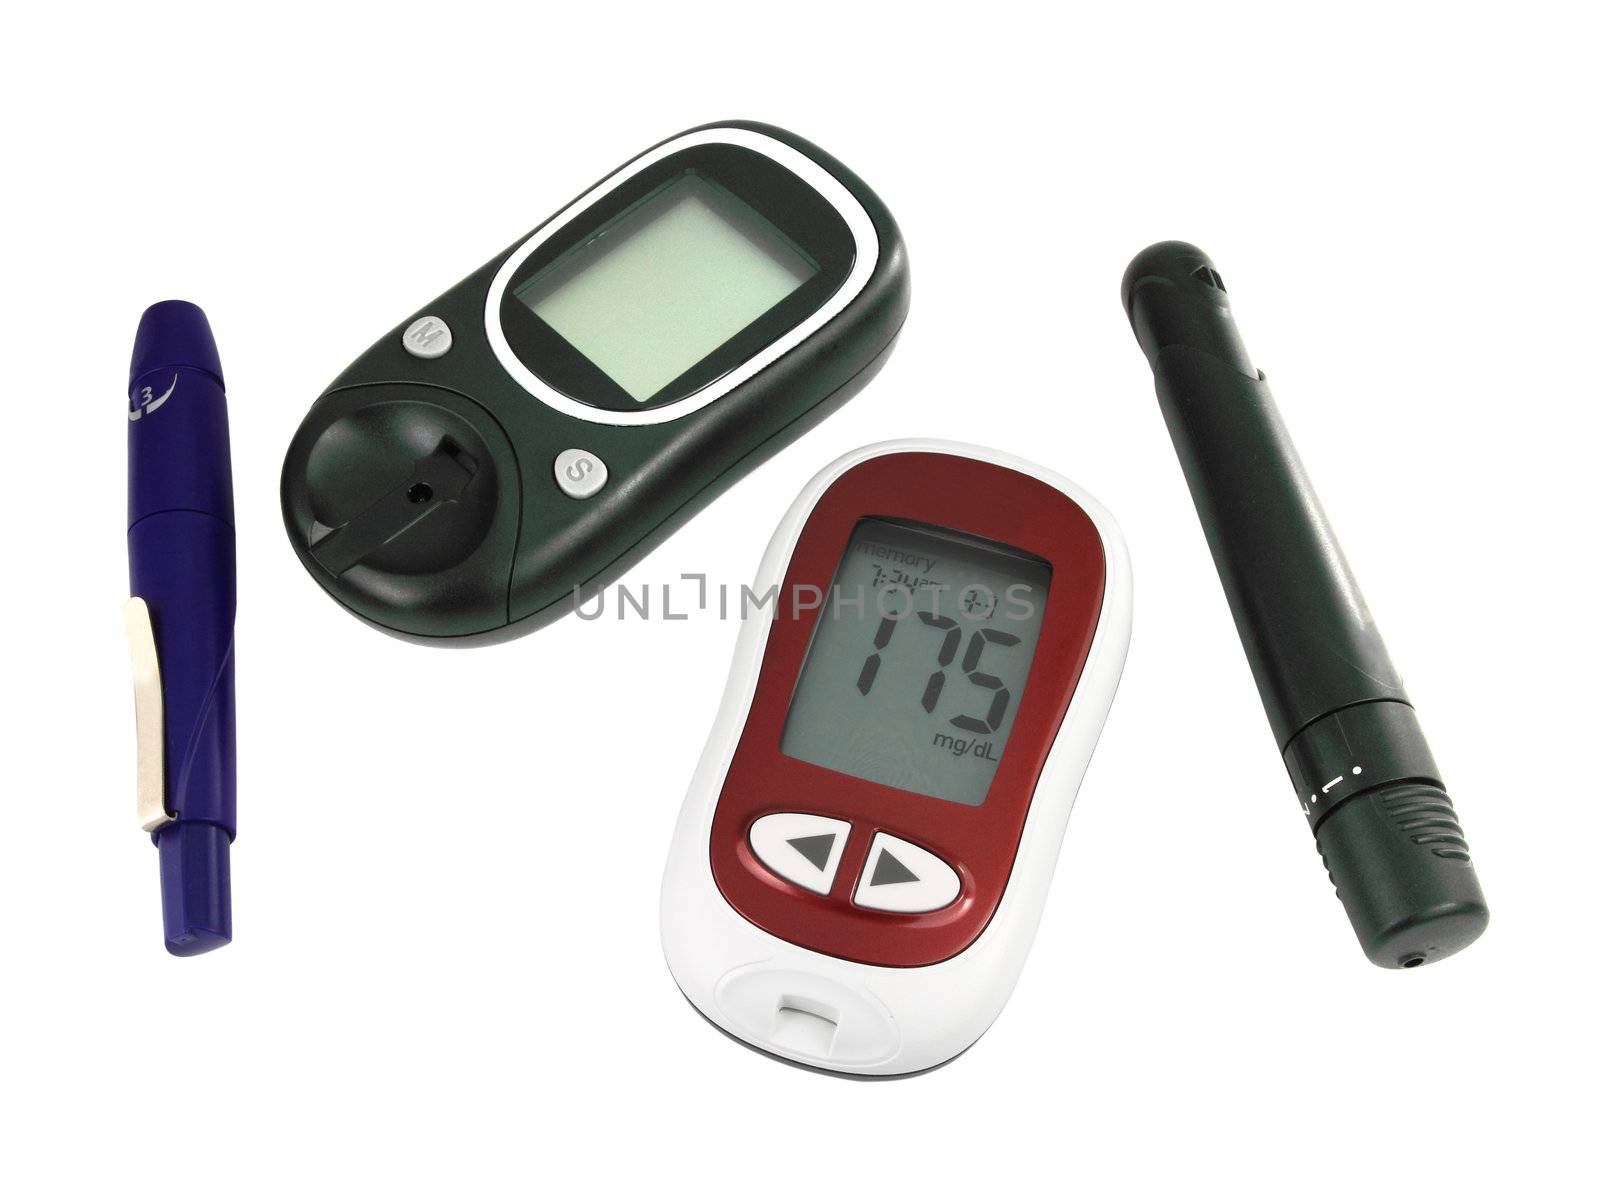 Glucometer for checking blood sugar levels isolated on a white background